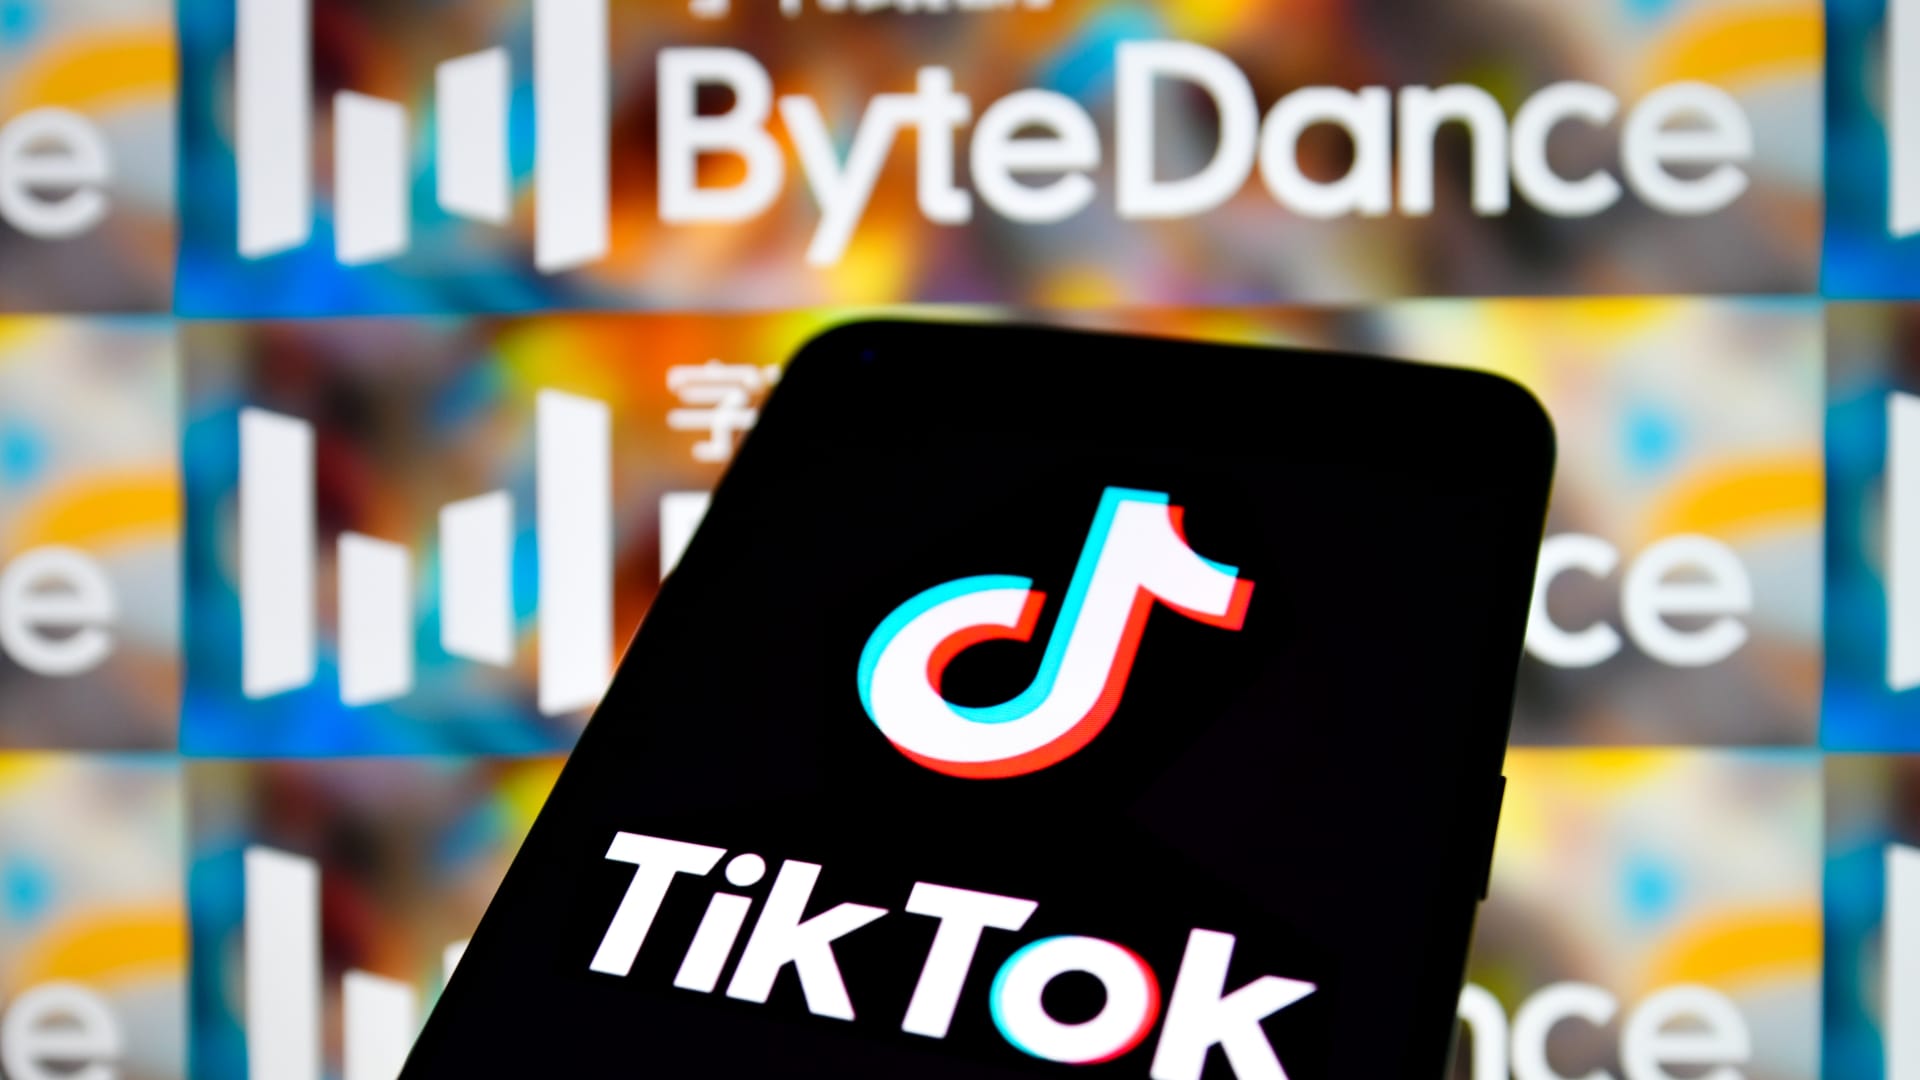 TikTok owner ByteDance axes hundreds of jobs in gaming unit as it scales back ambition